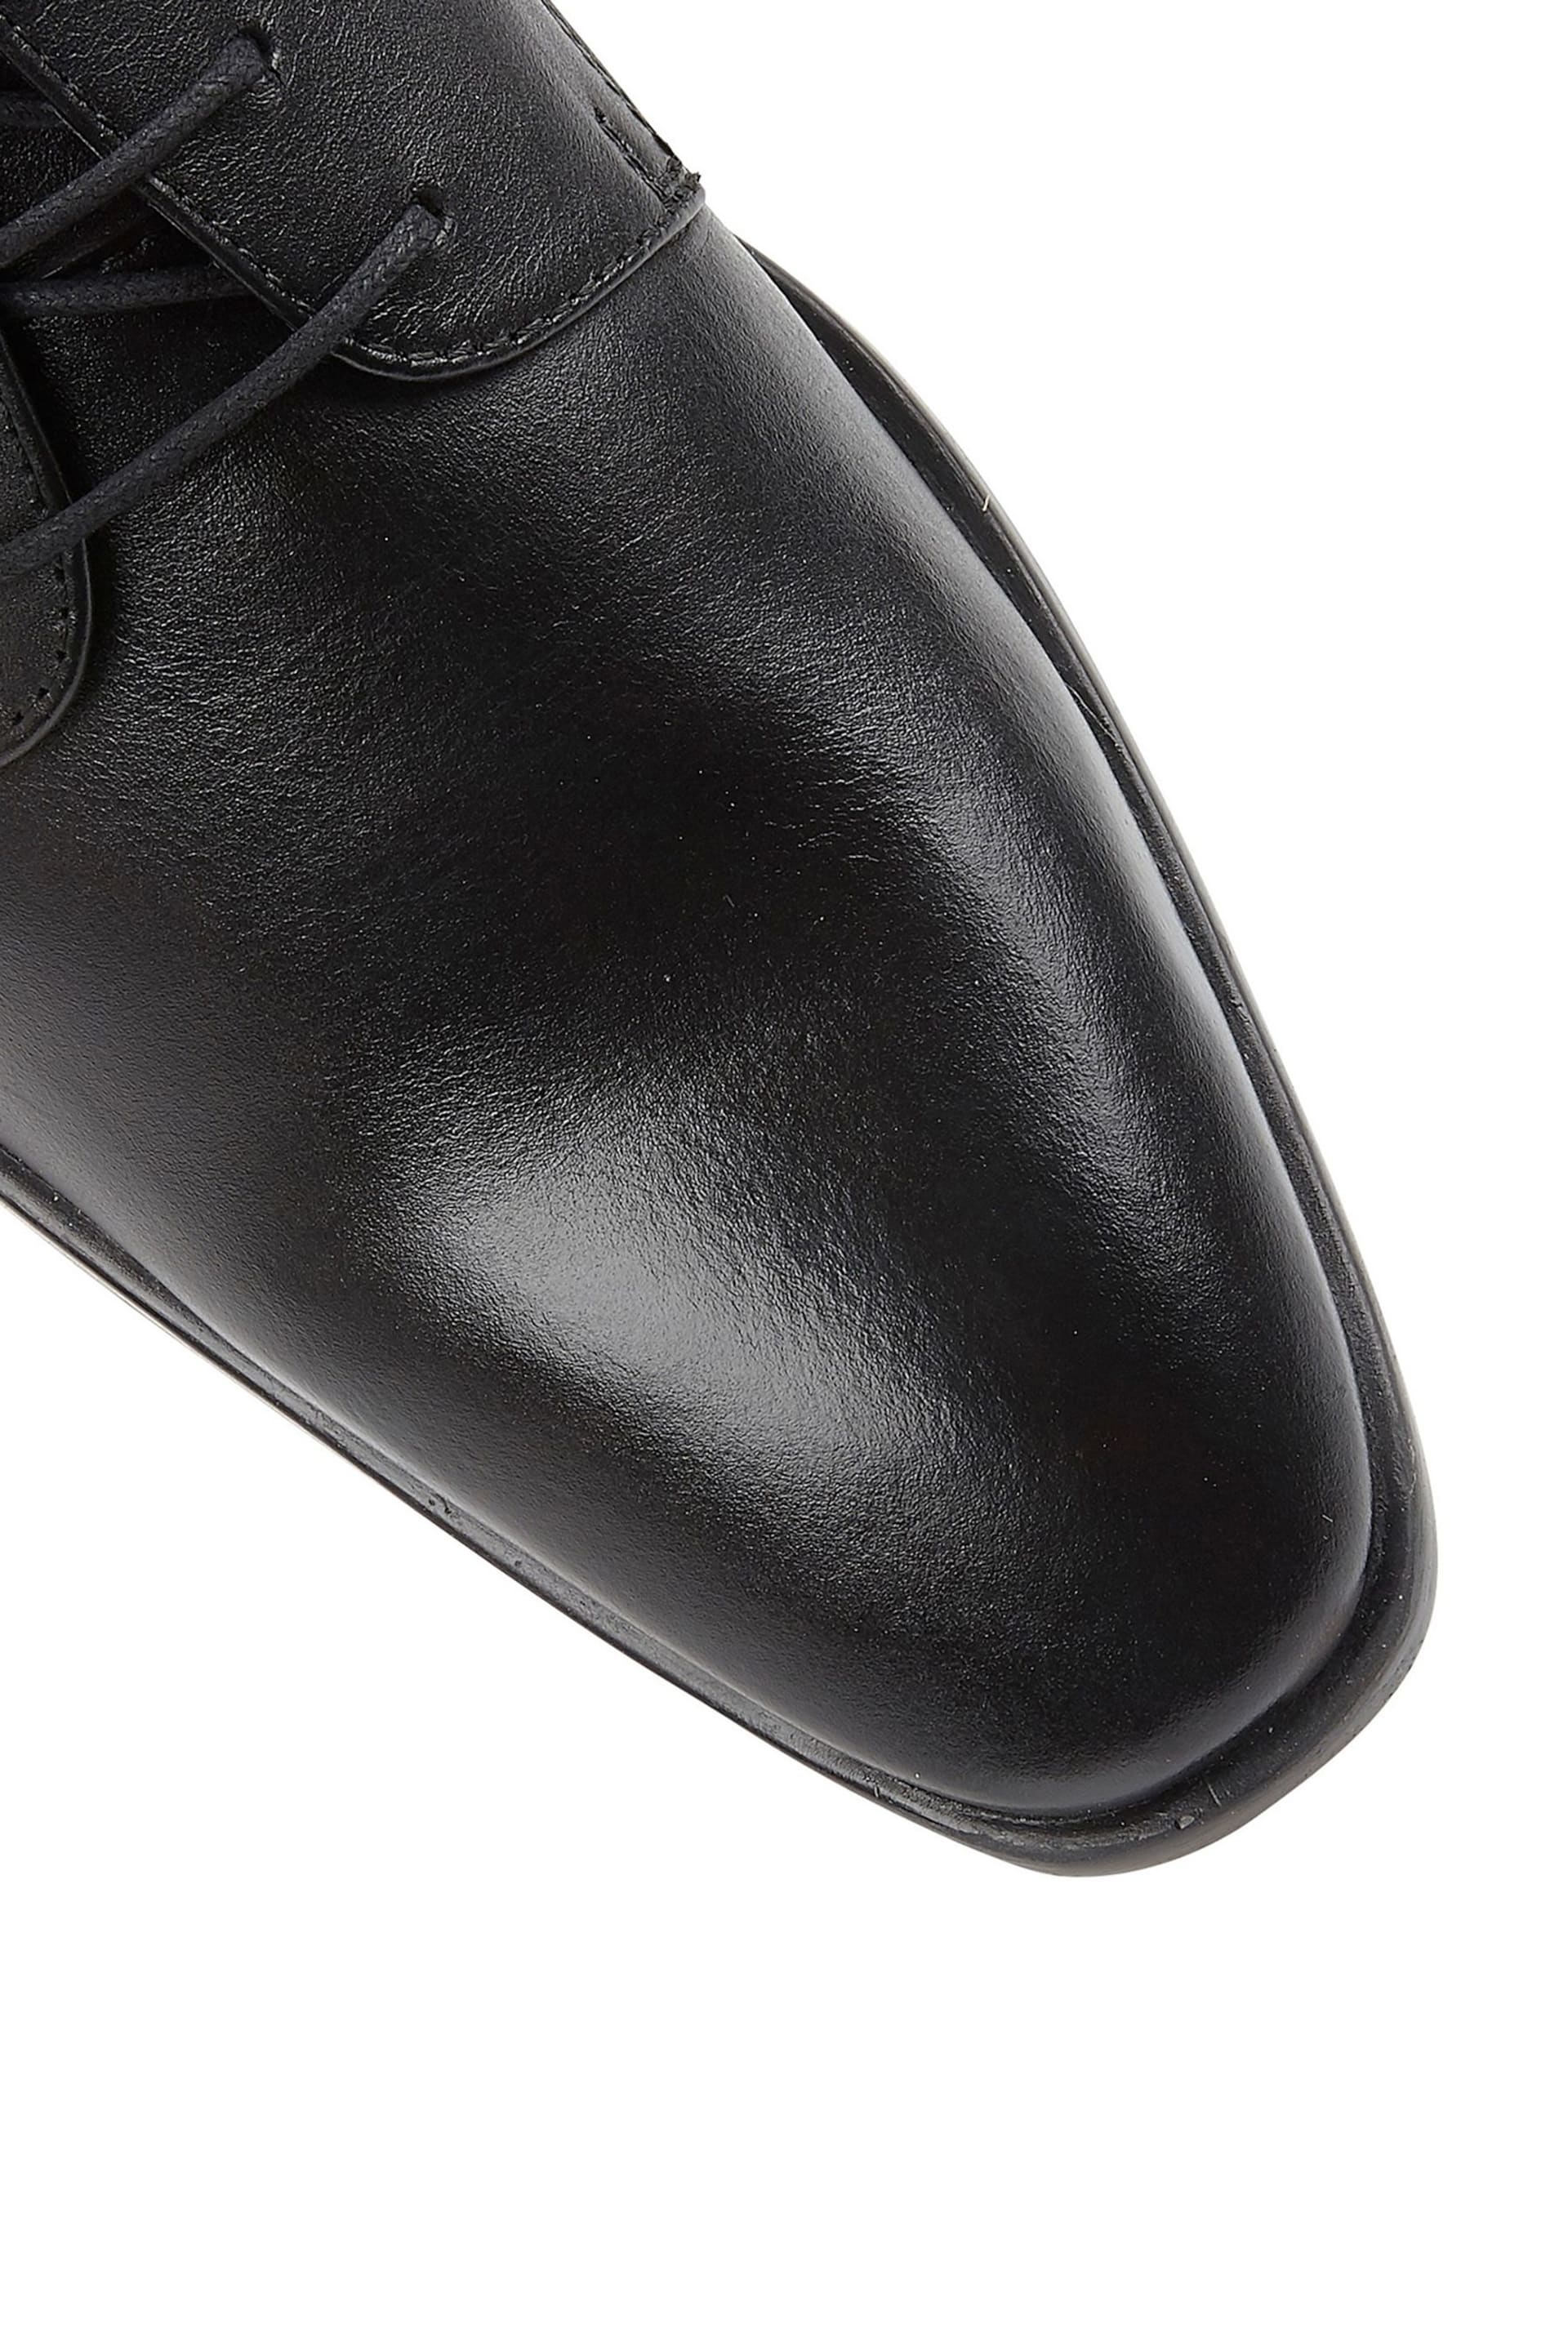 Lotus Charcole Black Leather Derby Shoes - Image 4 of 4